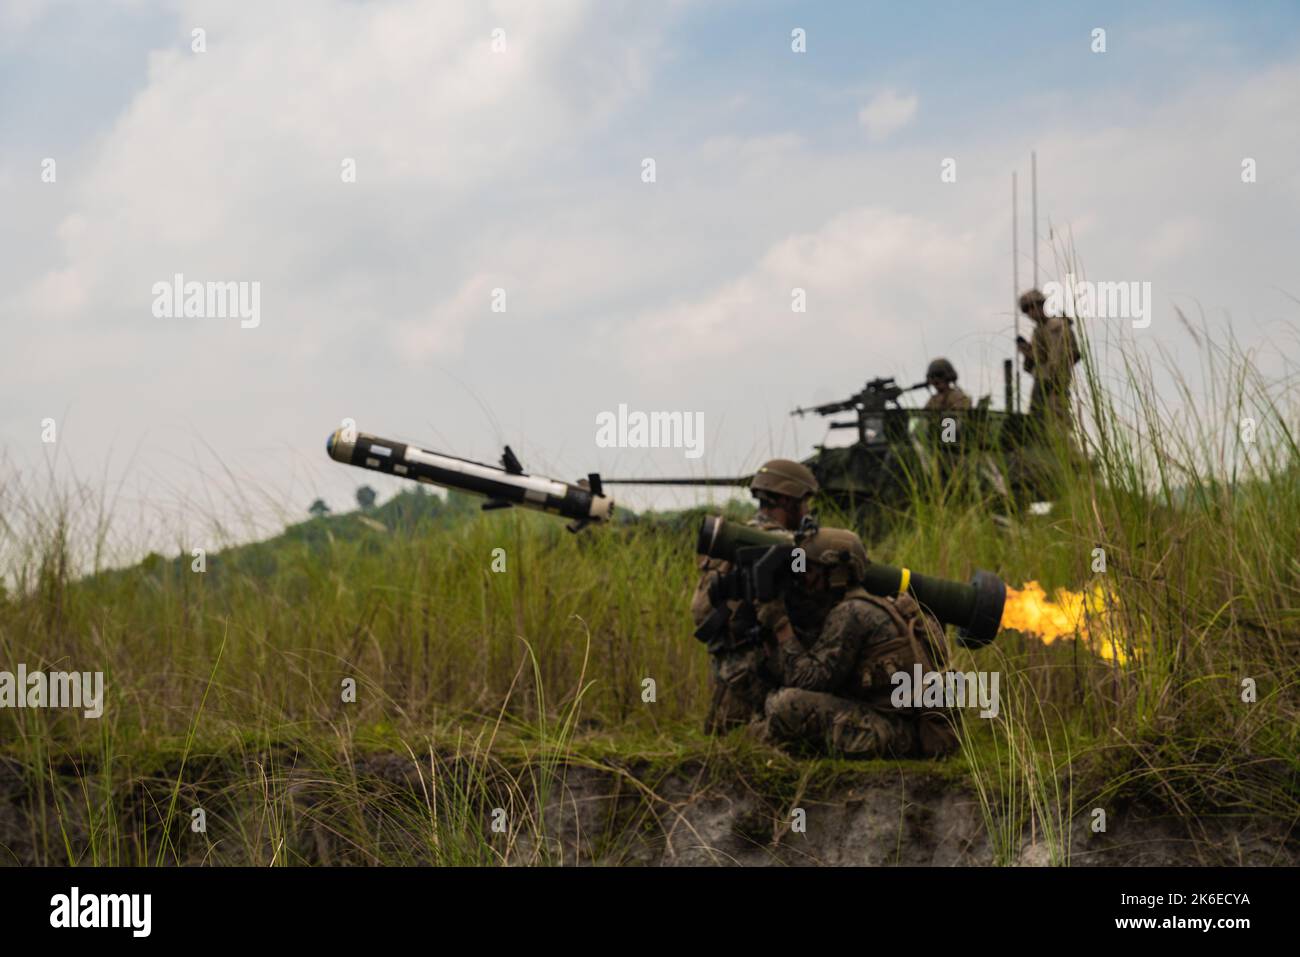 U.S. Marines with Battalion Landing Team 2d Battalion, 5th Marines, 31st Marine Expeditionary Unit, fire a Javelin shoulder-fired anti-tank missile in a combined arms live-fire event during KAMANDAG 6 at Colonel Ernesto Rabina Air Base, Philippines, Oct. 13, 2022. KAMANDAG is an annual bilateral exercise between the Armed Forces of the Philippines and U.S. military designed to strengthen interoperability, capabilities, trust, and cooperation built over decades of shared experiences. (U.S. Marine Corps photo by Cpl. Ujian Gosun) Stock Photo